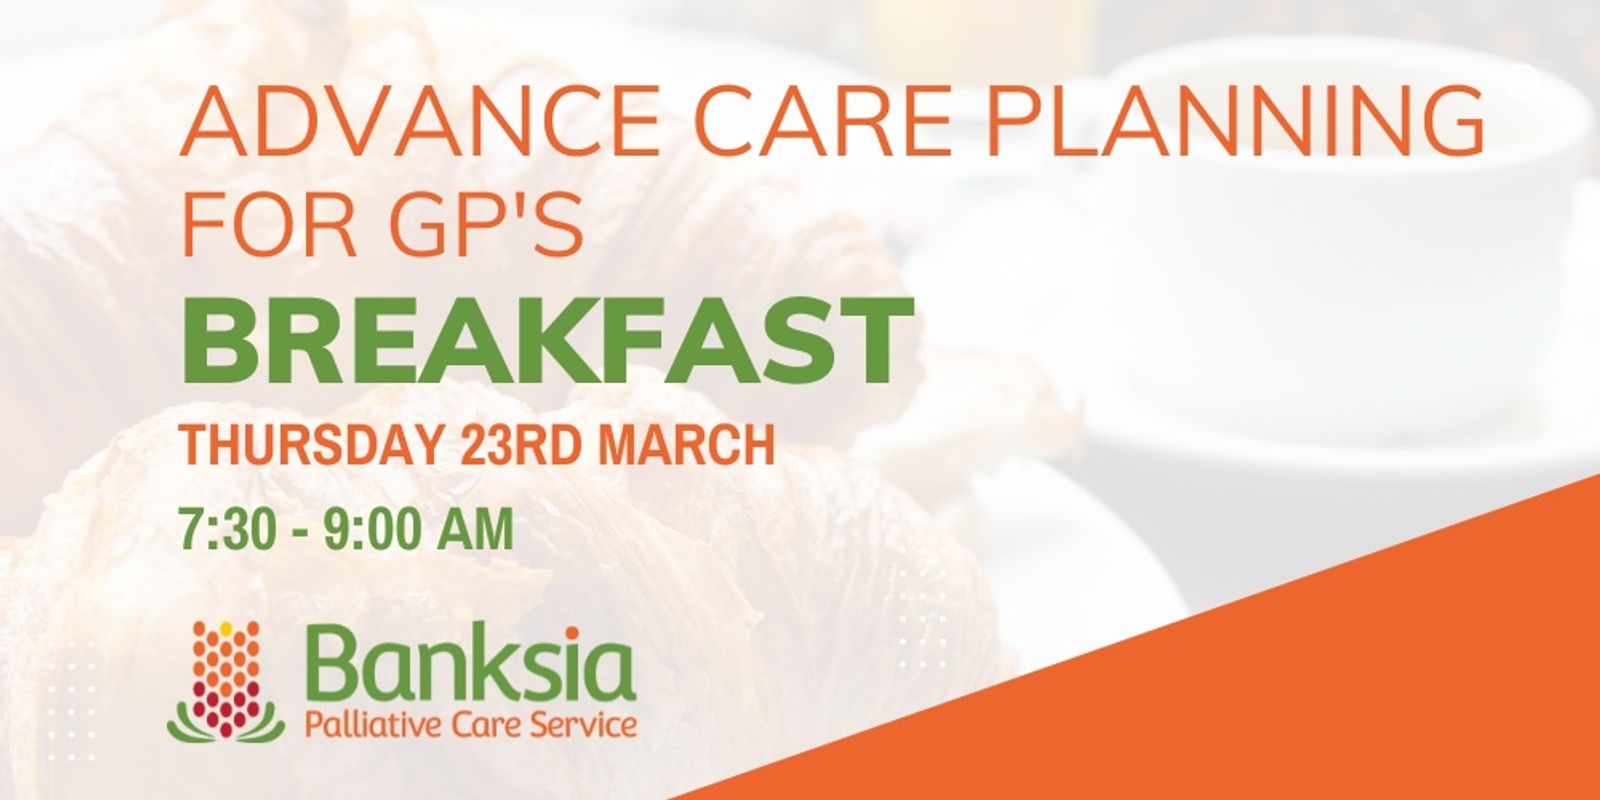 Advance Care Planning Breakfast for GP's